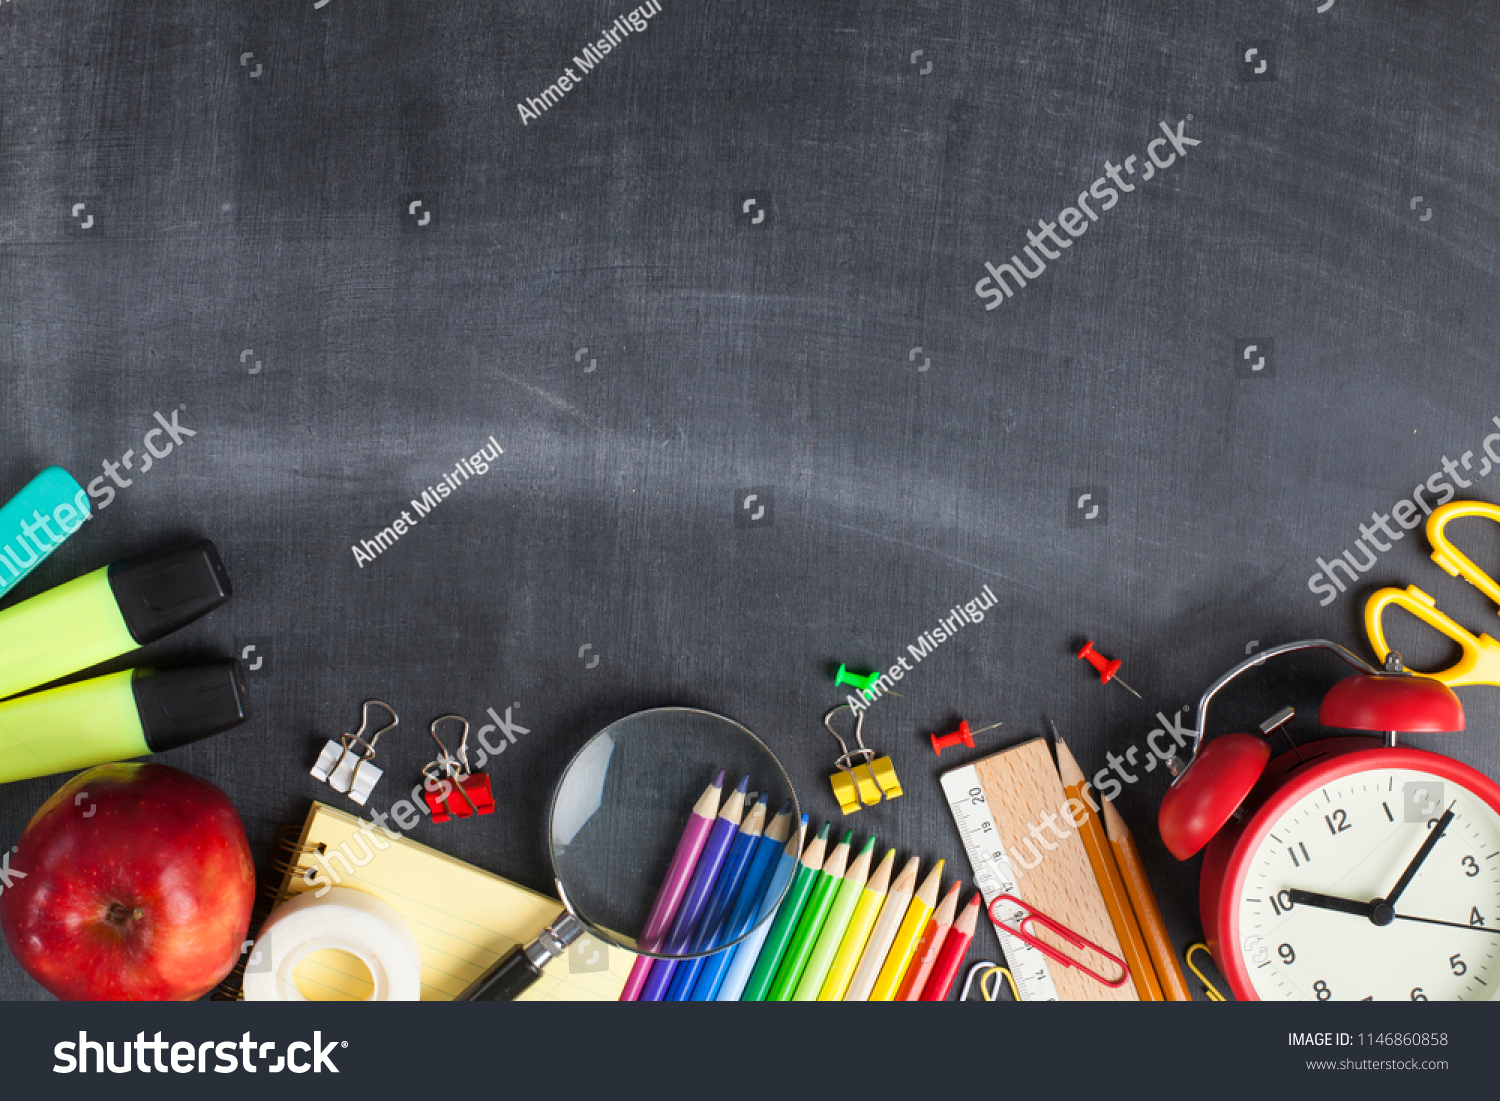 School supplies on black board background. Back to school concept #1146860858